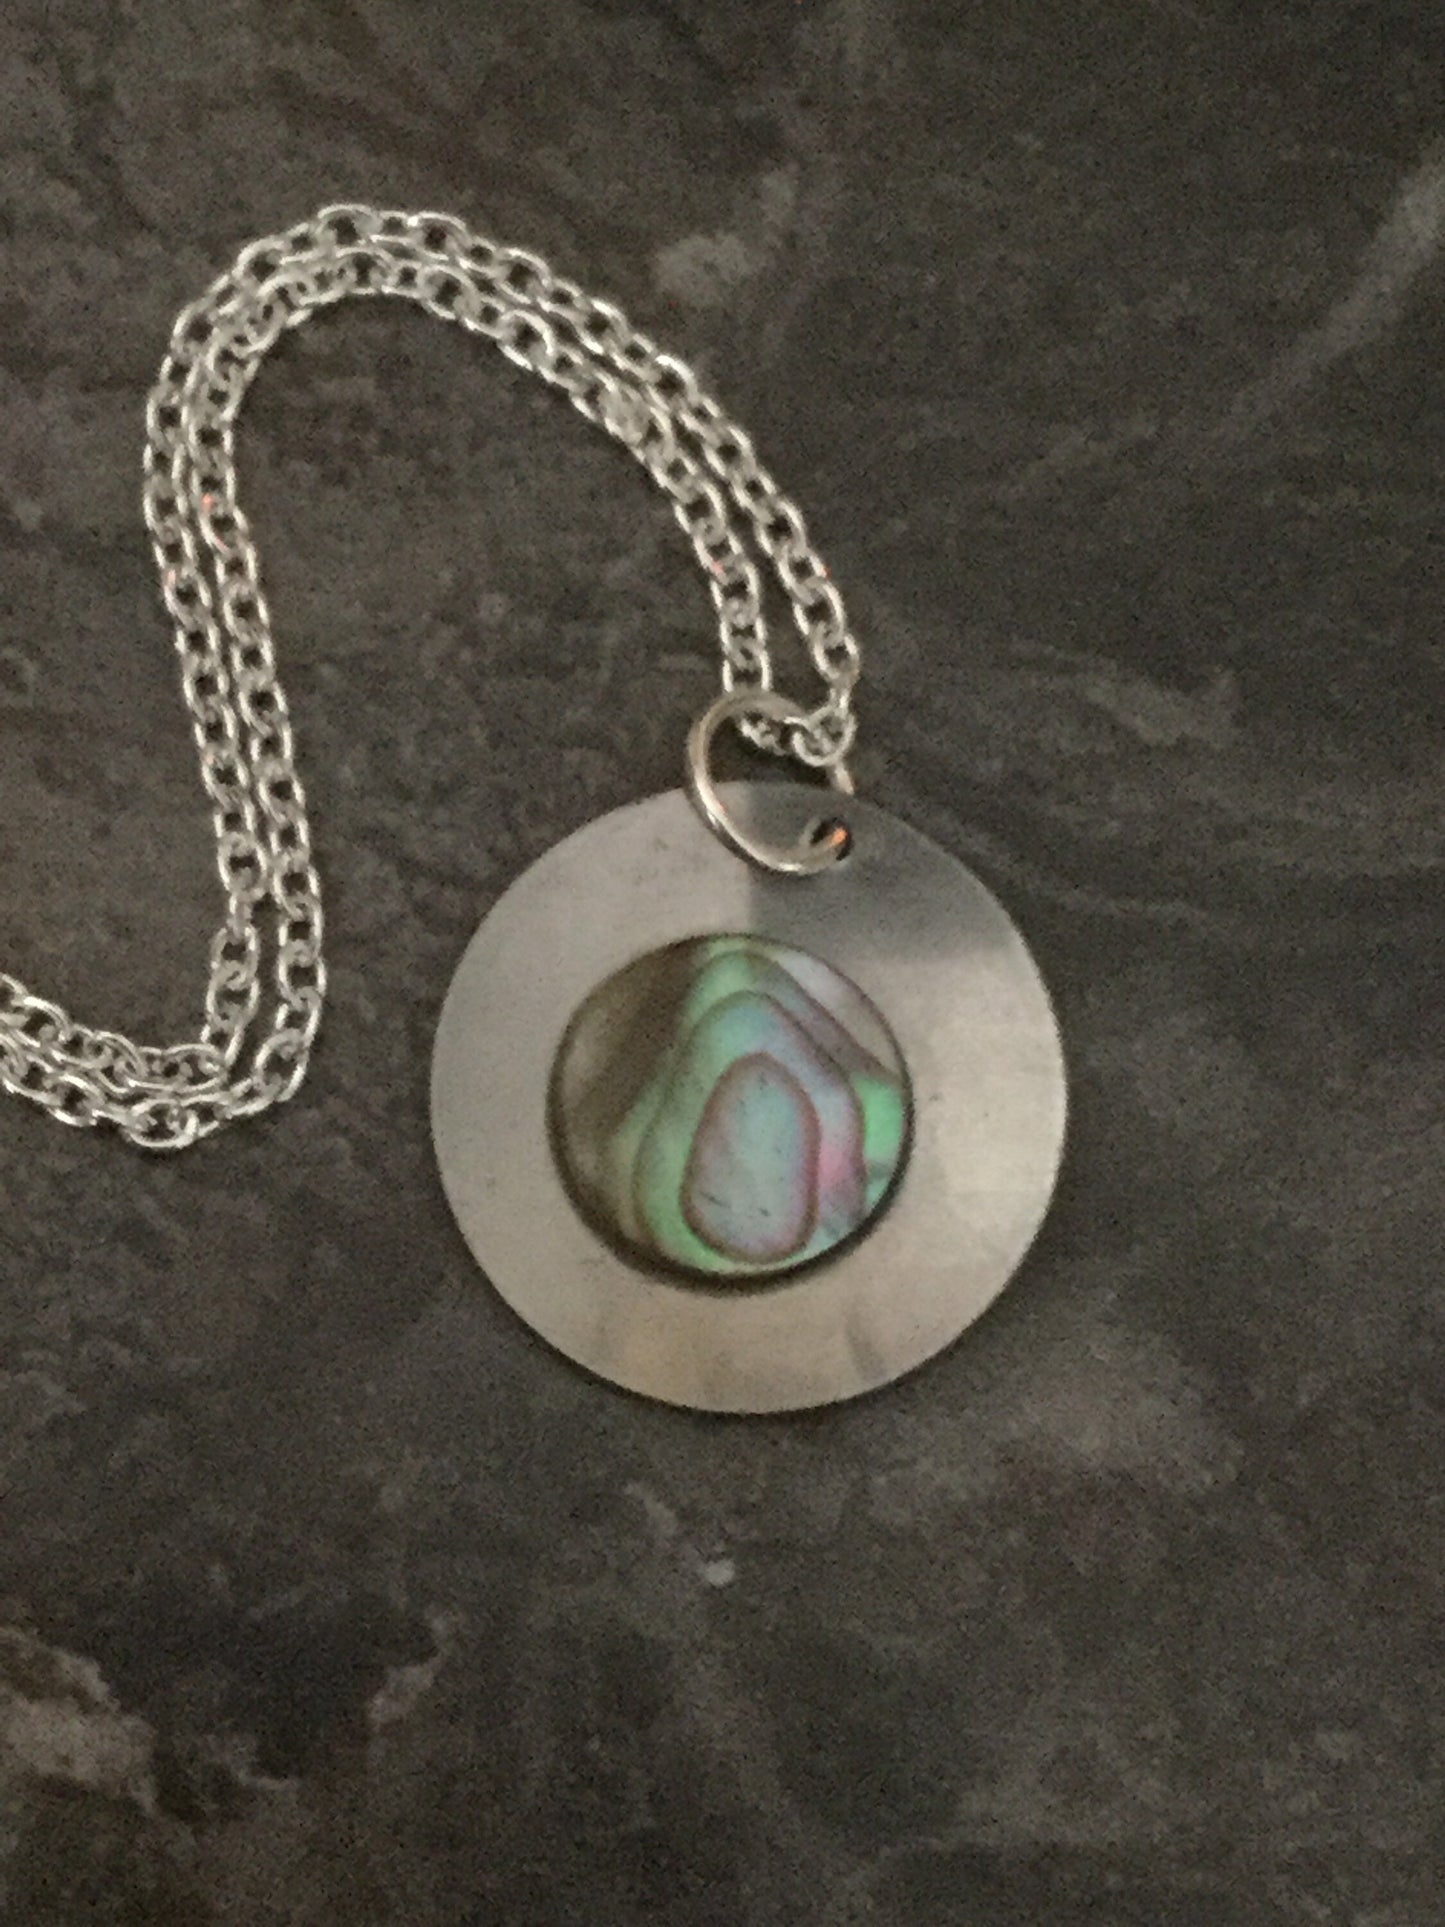 Vintage Modernist silver tone stainless steel necklace chain with central abalone shell